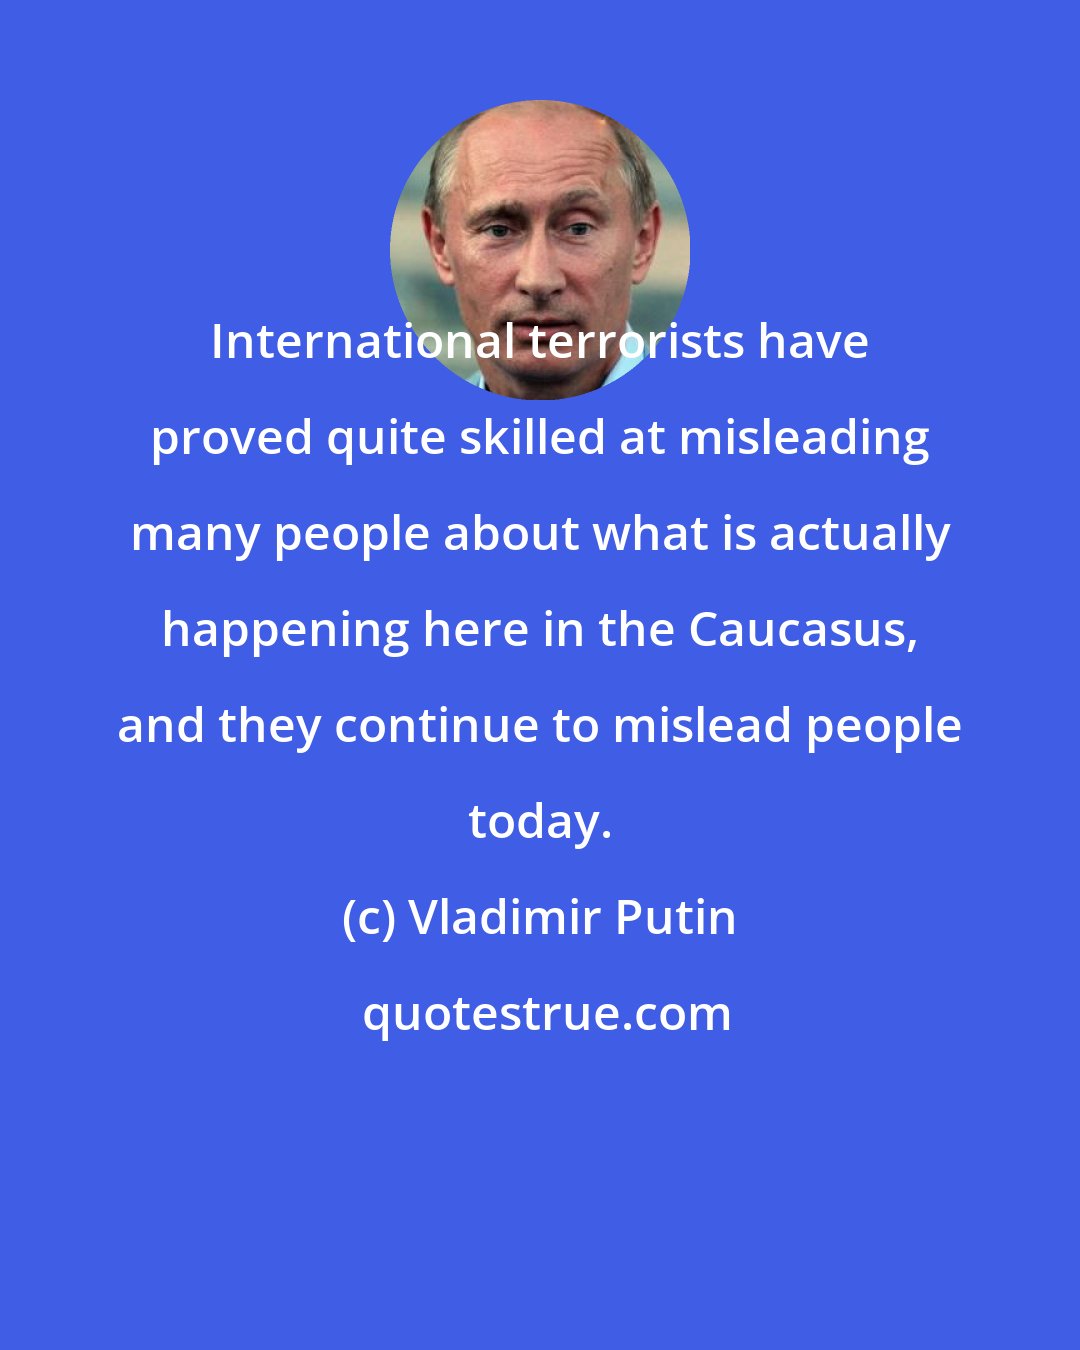 Vladimir Putin: International terrorists have proved quite skilled at misleading many people about what is actually happening here in the Caucasus, and they continue to mislead people today.